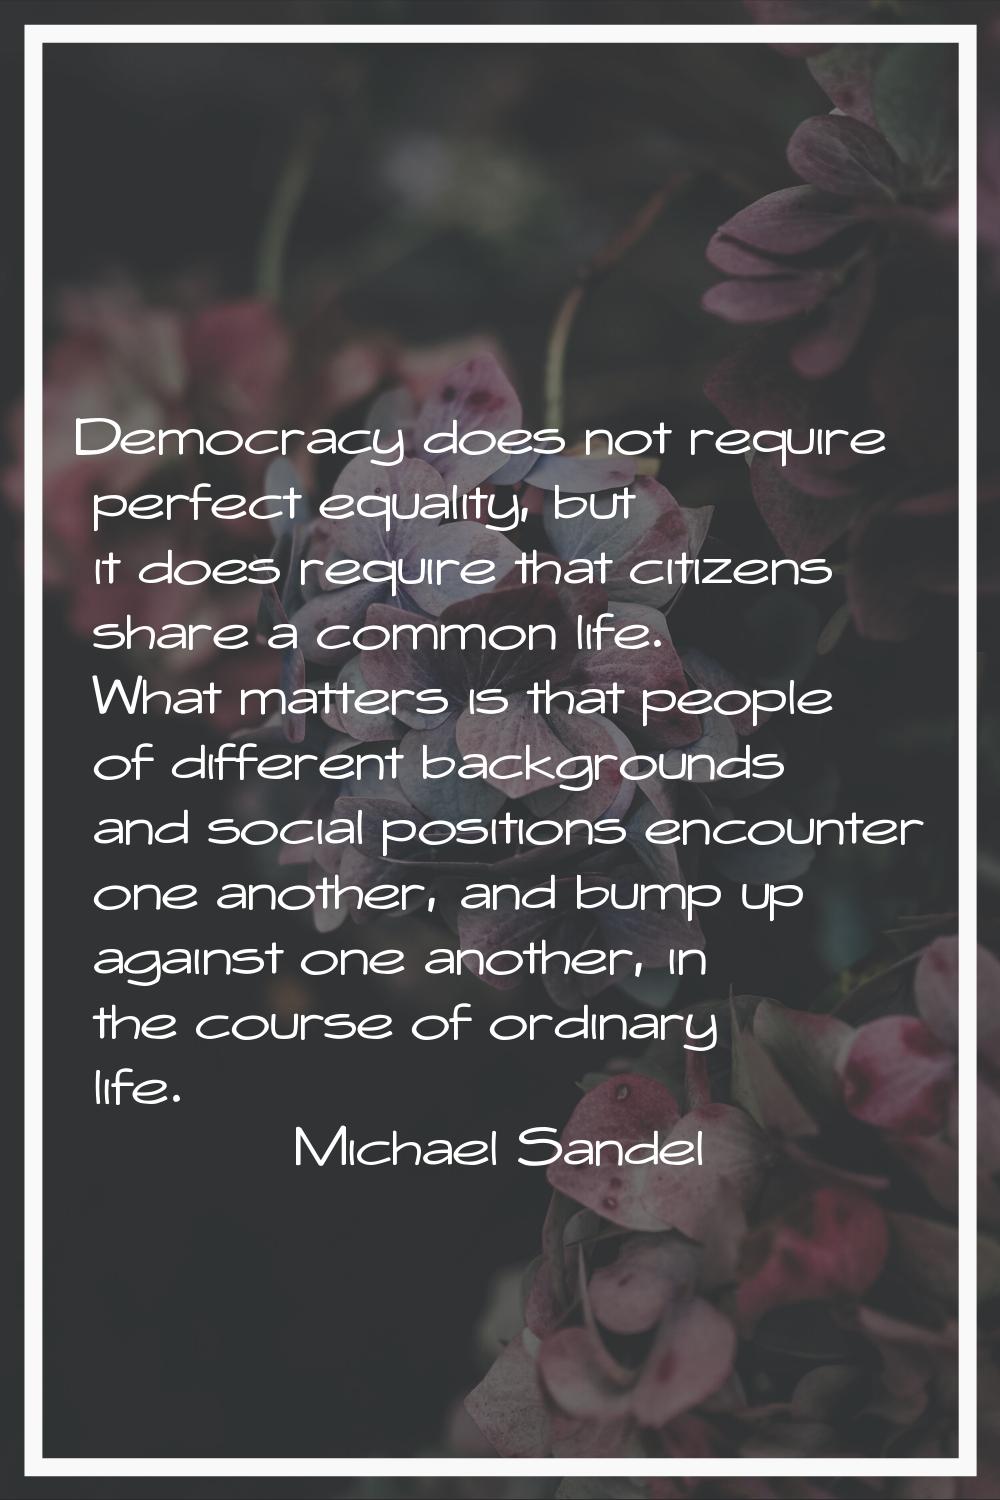 Democracy does not require perfect equality, but it does require that citizens share a common life.